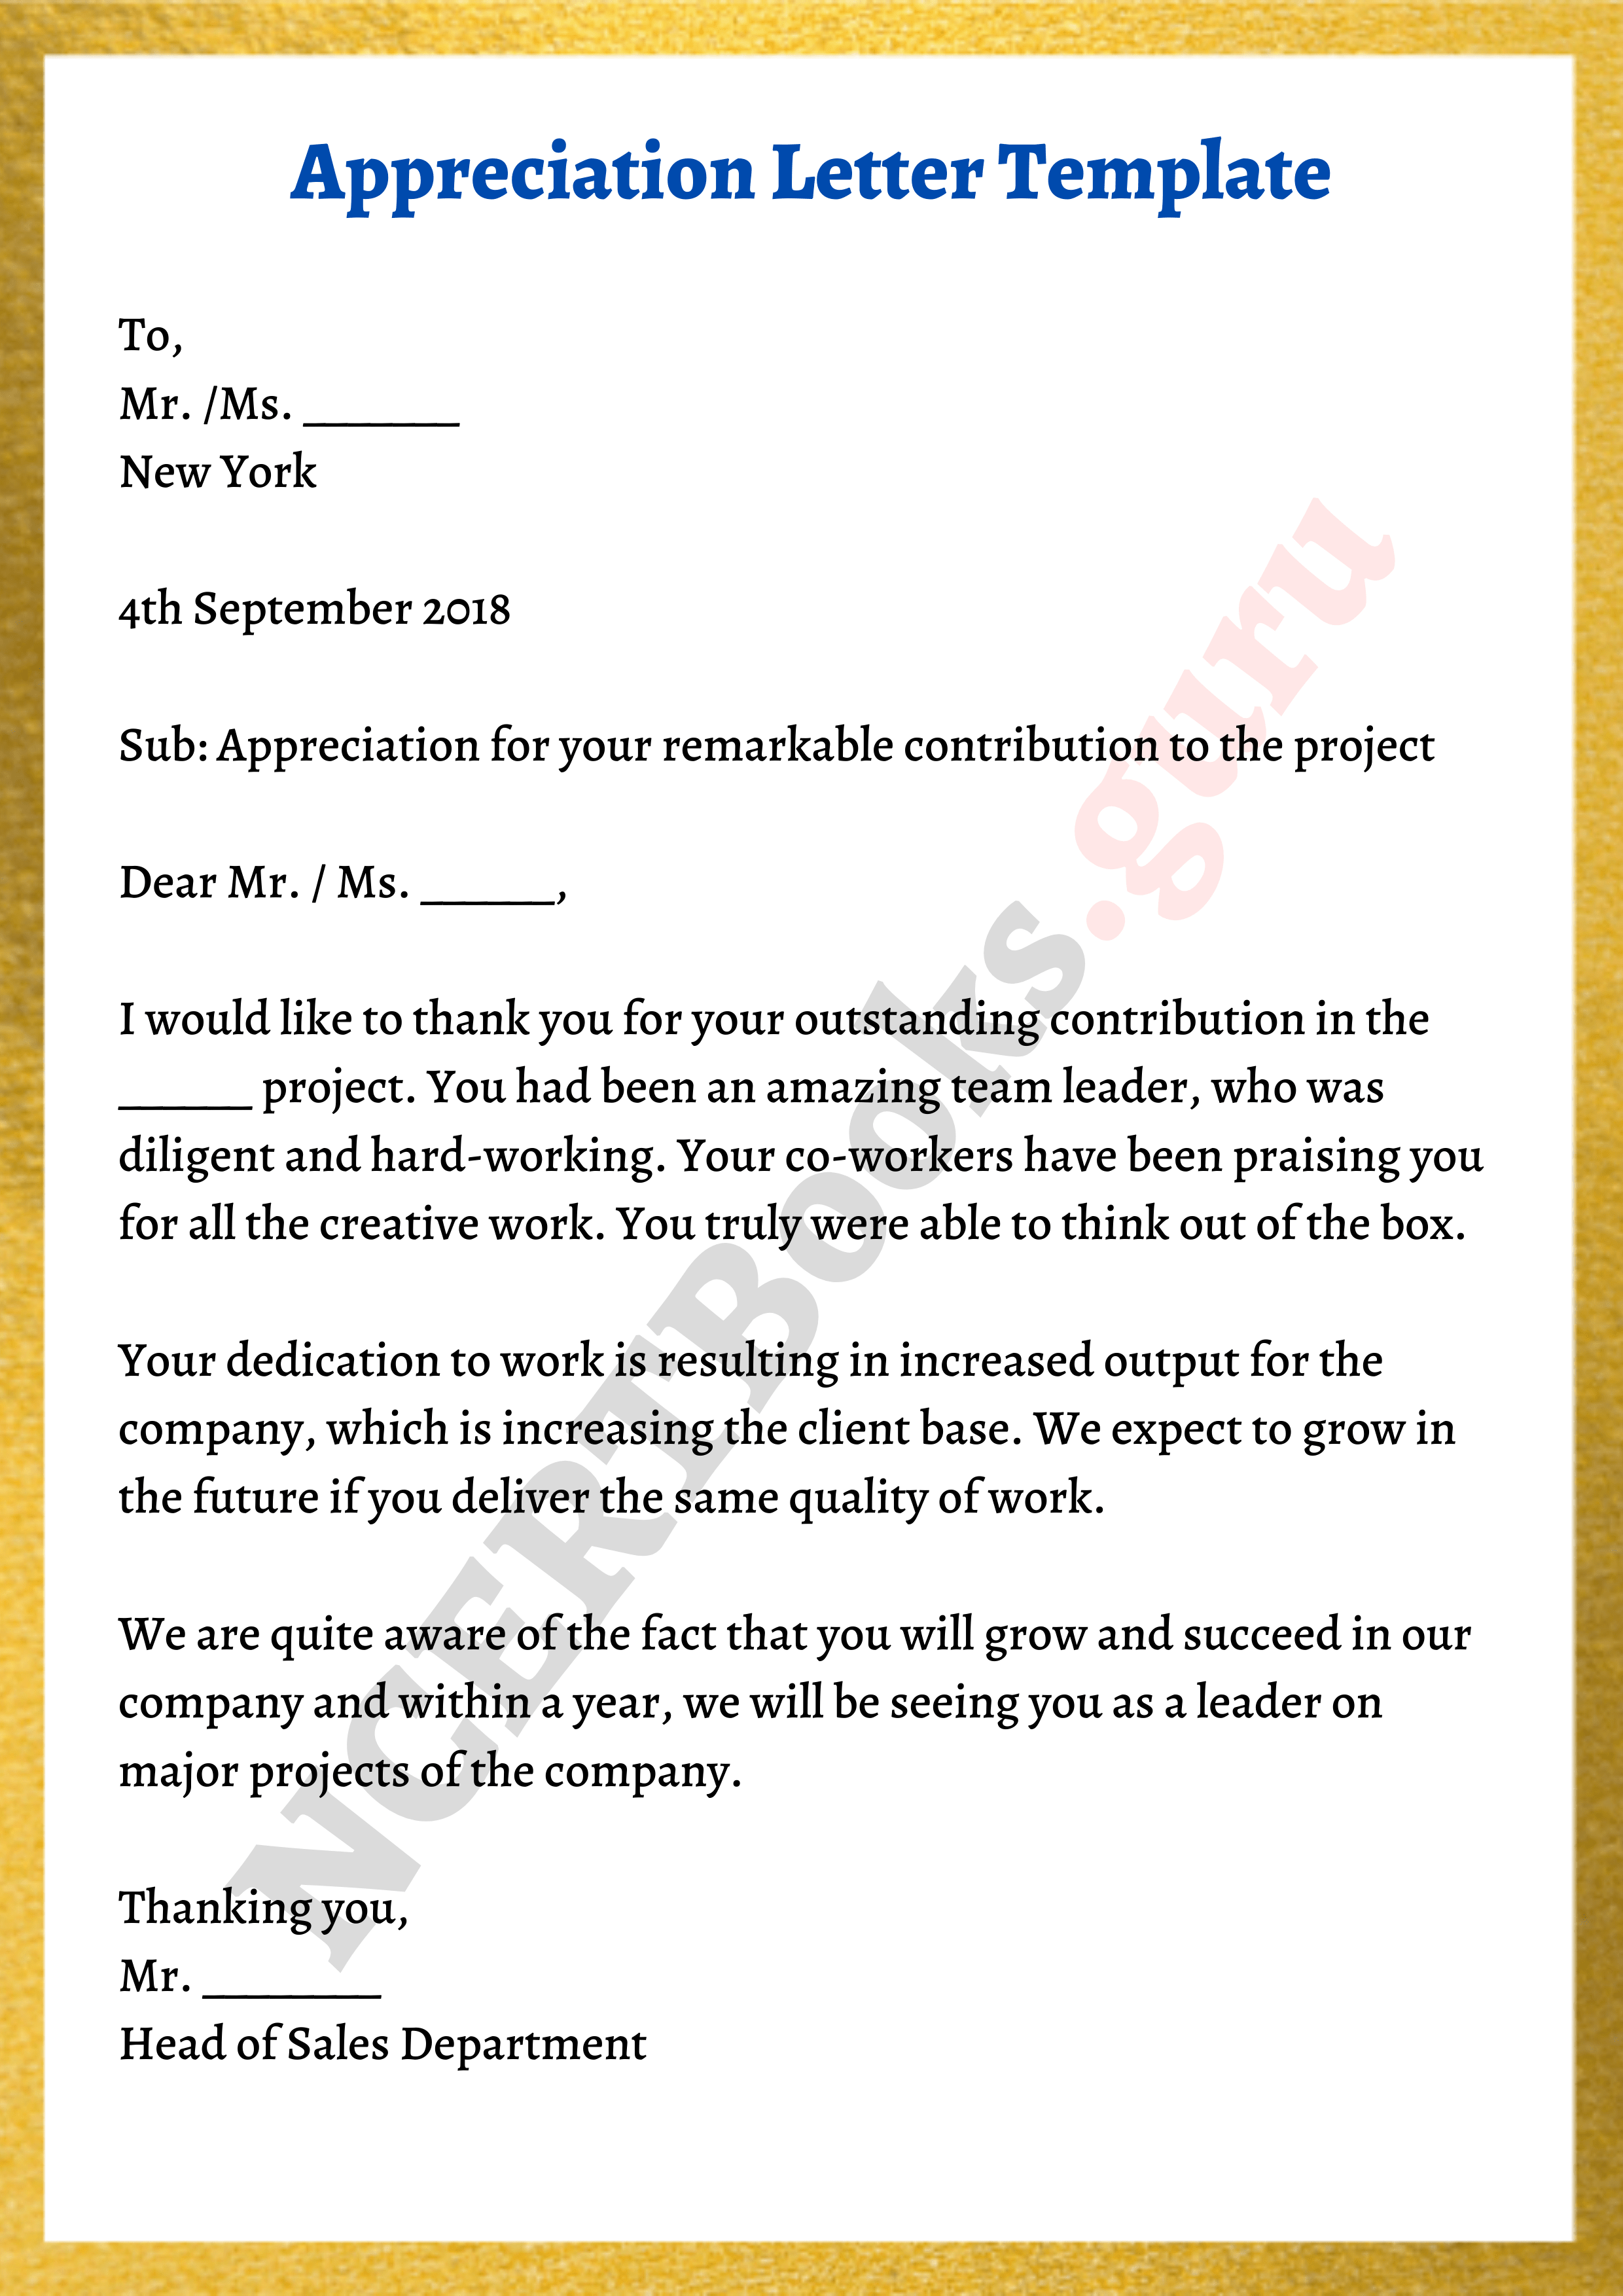 Template for letter of appreciation